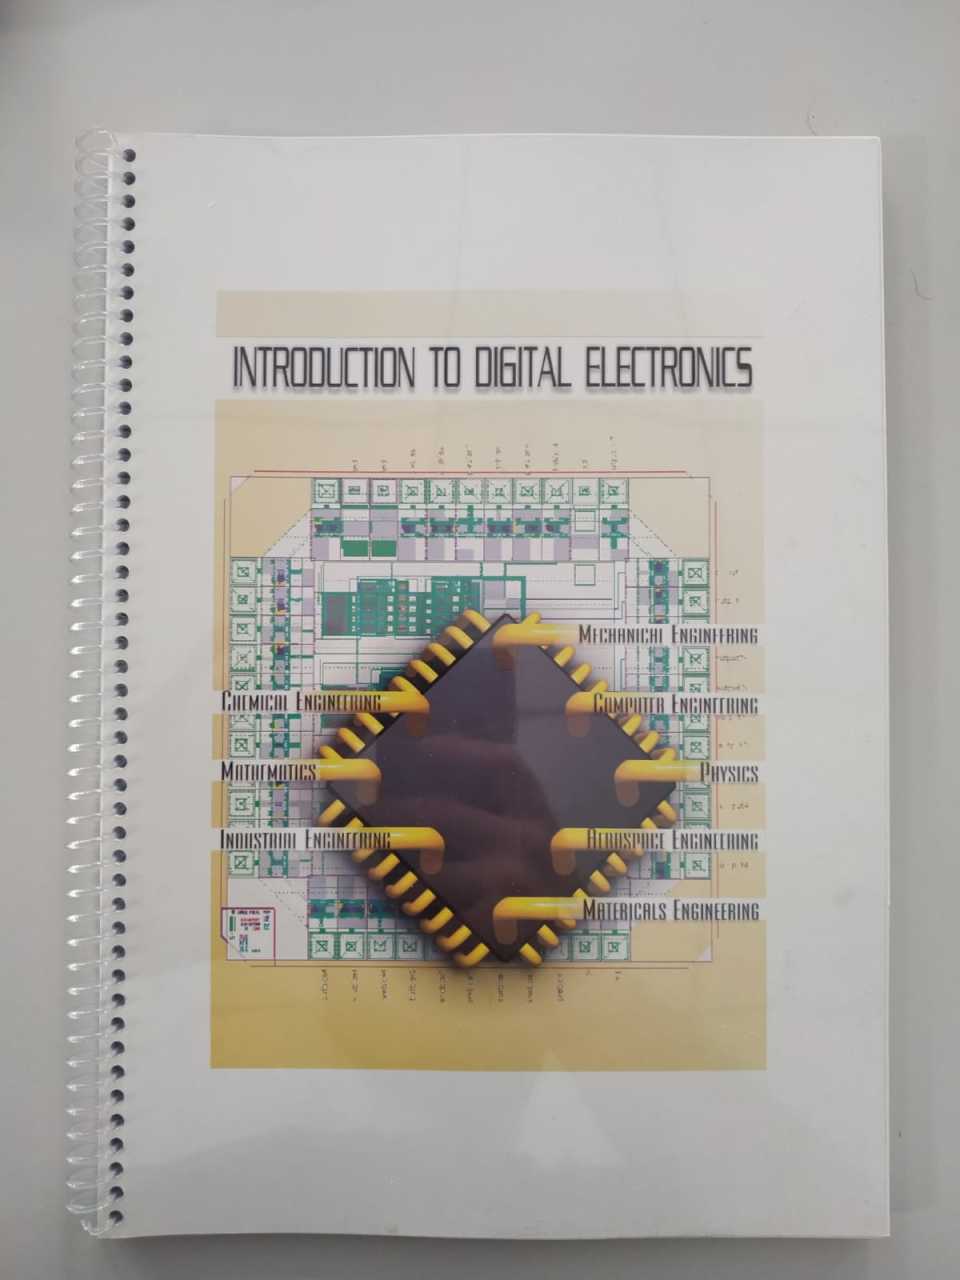 INTRODUCTION TO DIGITAL ELECTRONICS